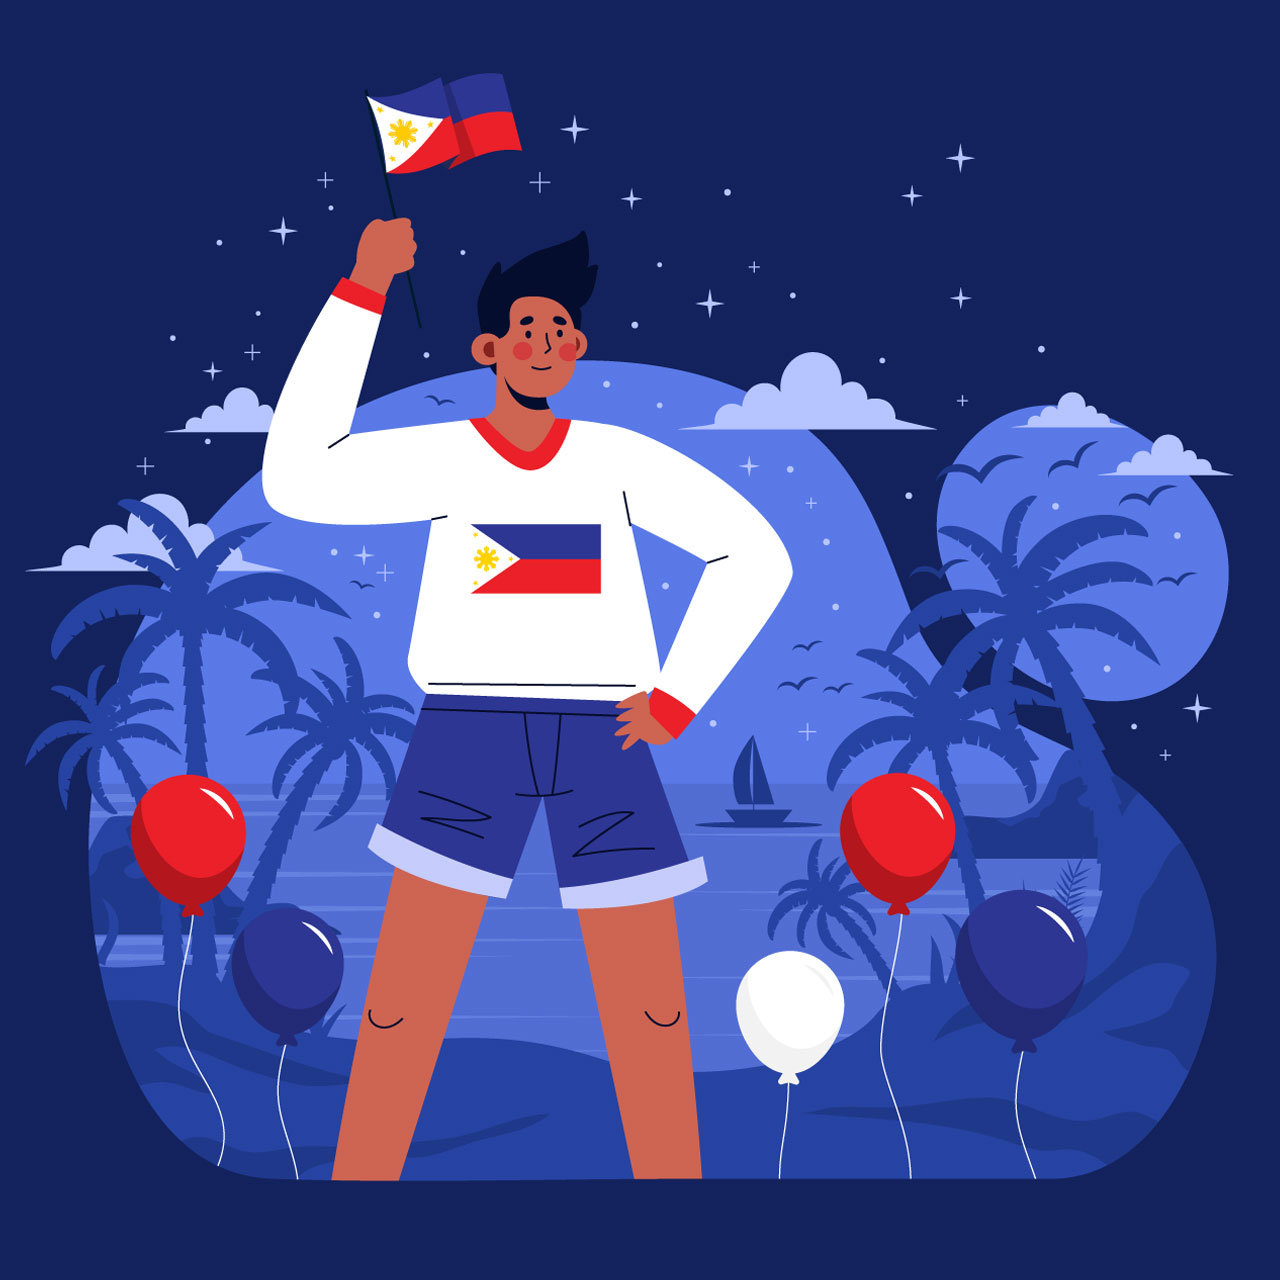 Flat philippine independence day illustration with man holding flag